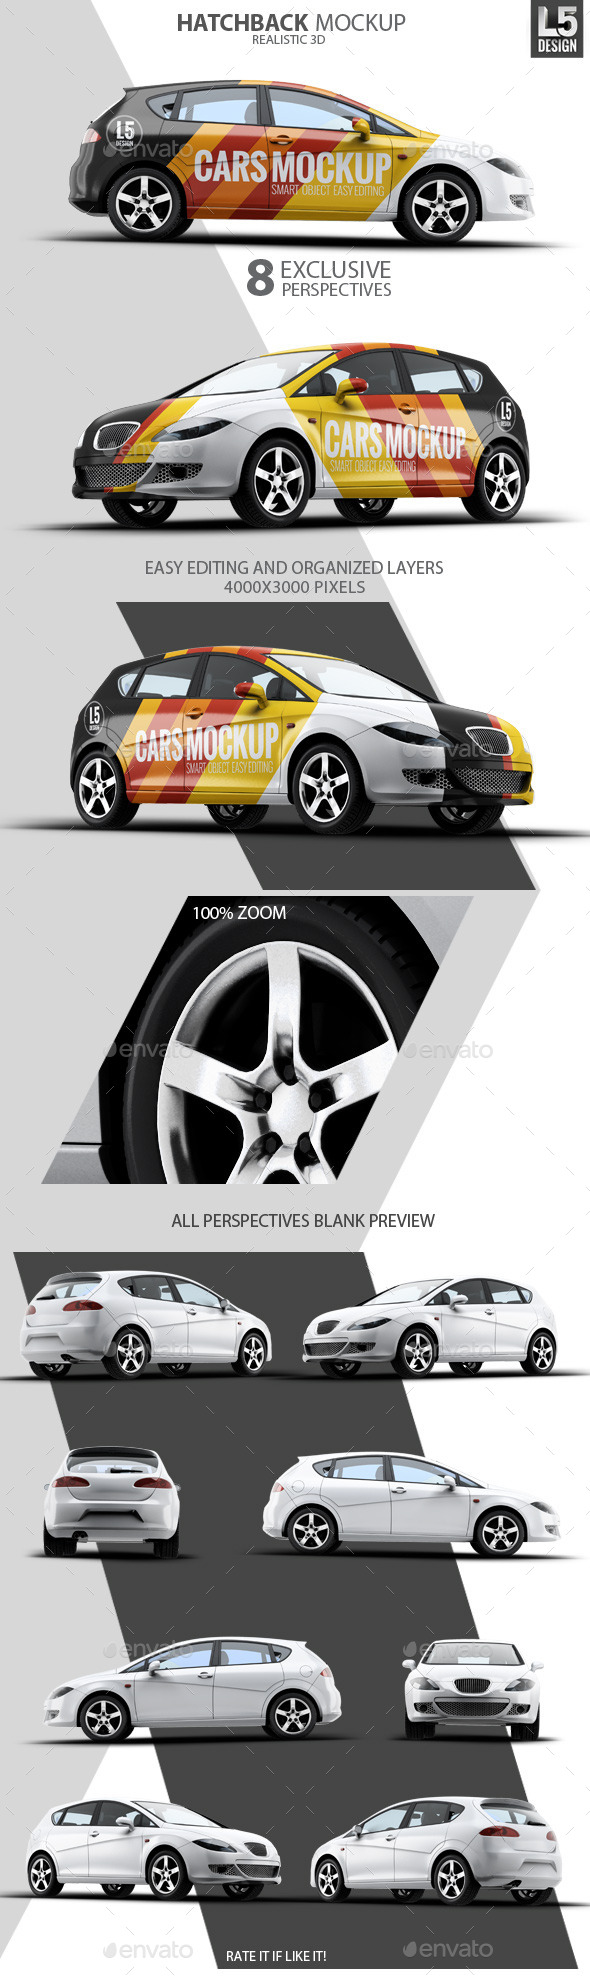 Download Car Mockup Graphics Designs Templates From Graphicriver Yellowimages Mockups